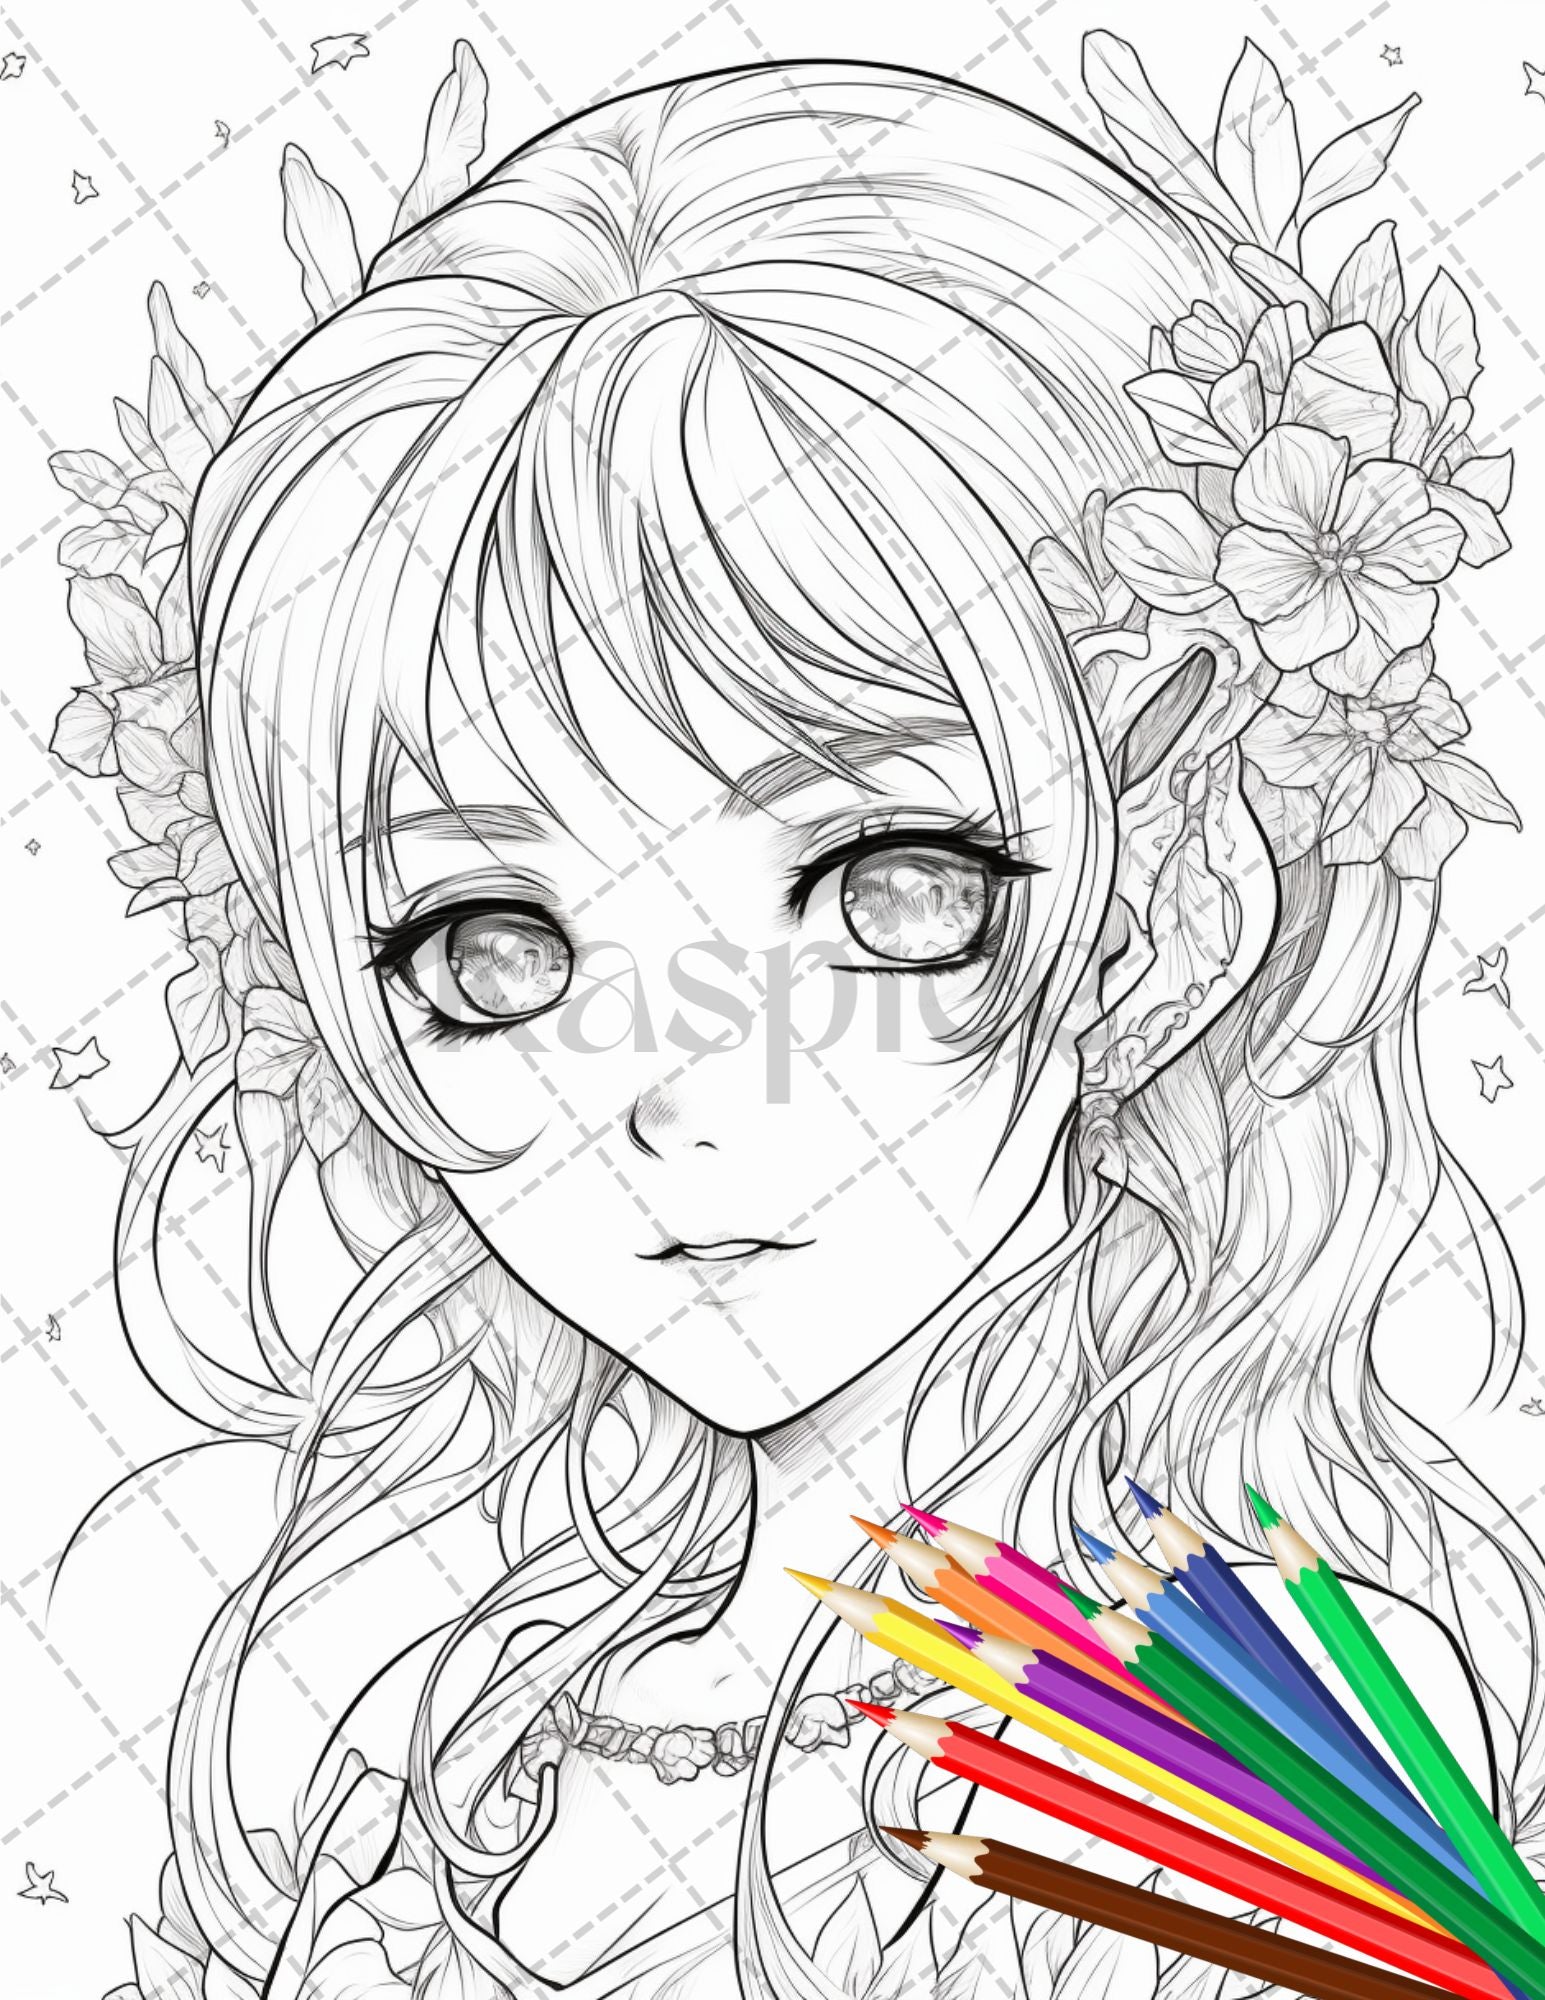 Printable Anime Fairy Tail Color Pages | 101 Activity | Star wars coloring  book, Coloring pages, Coloring books